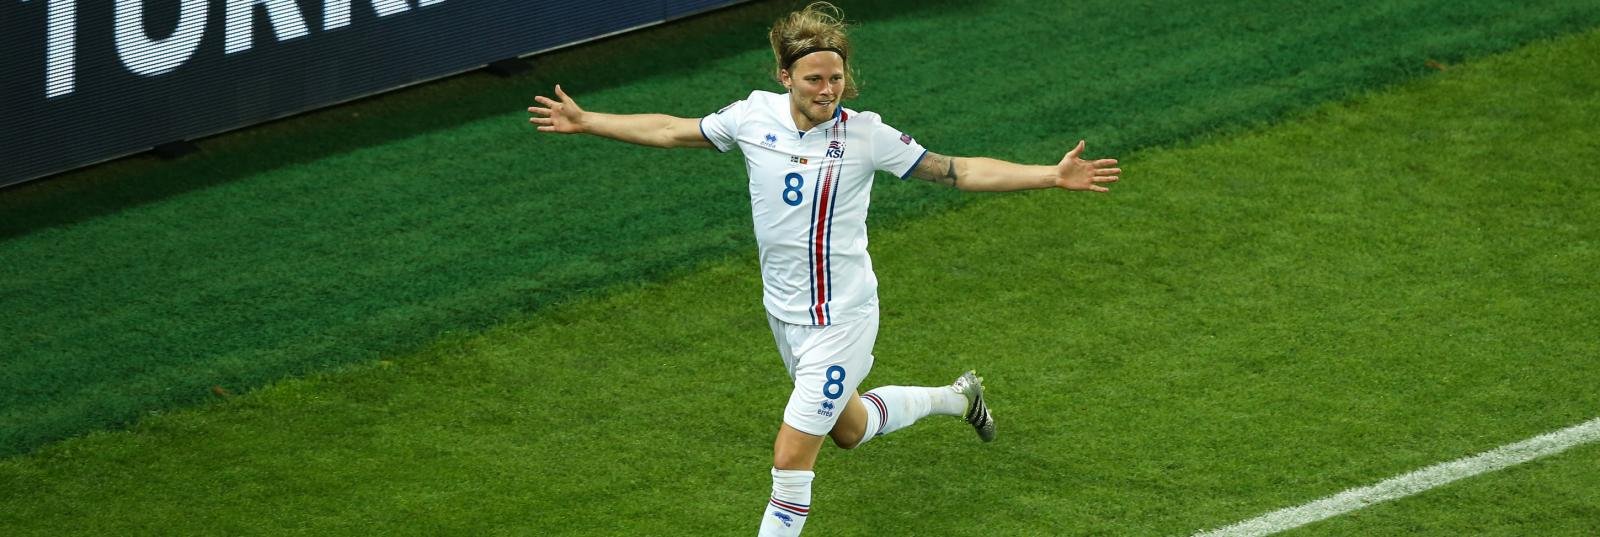 Iceland vs Hungary: EURO 2016 Group F Preview & Prediction